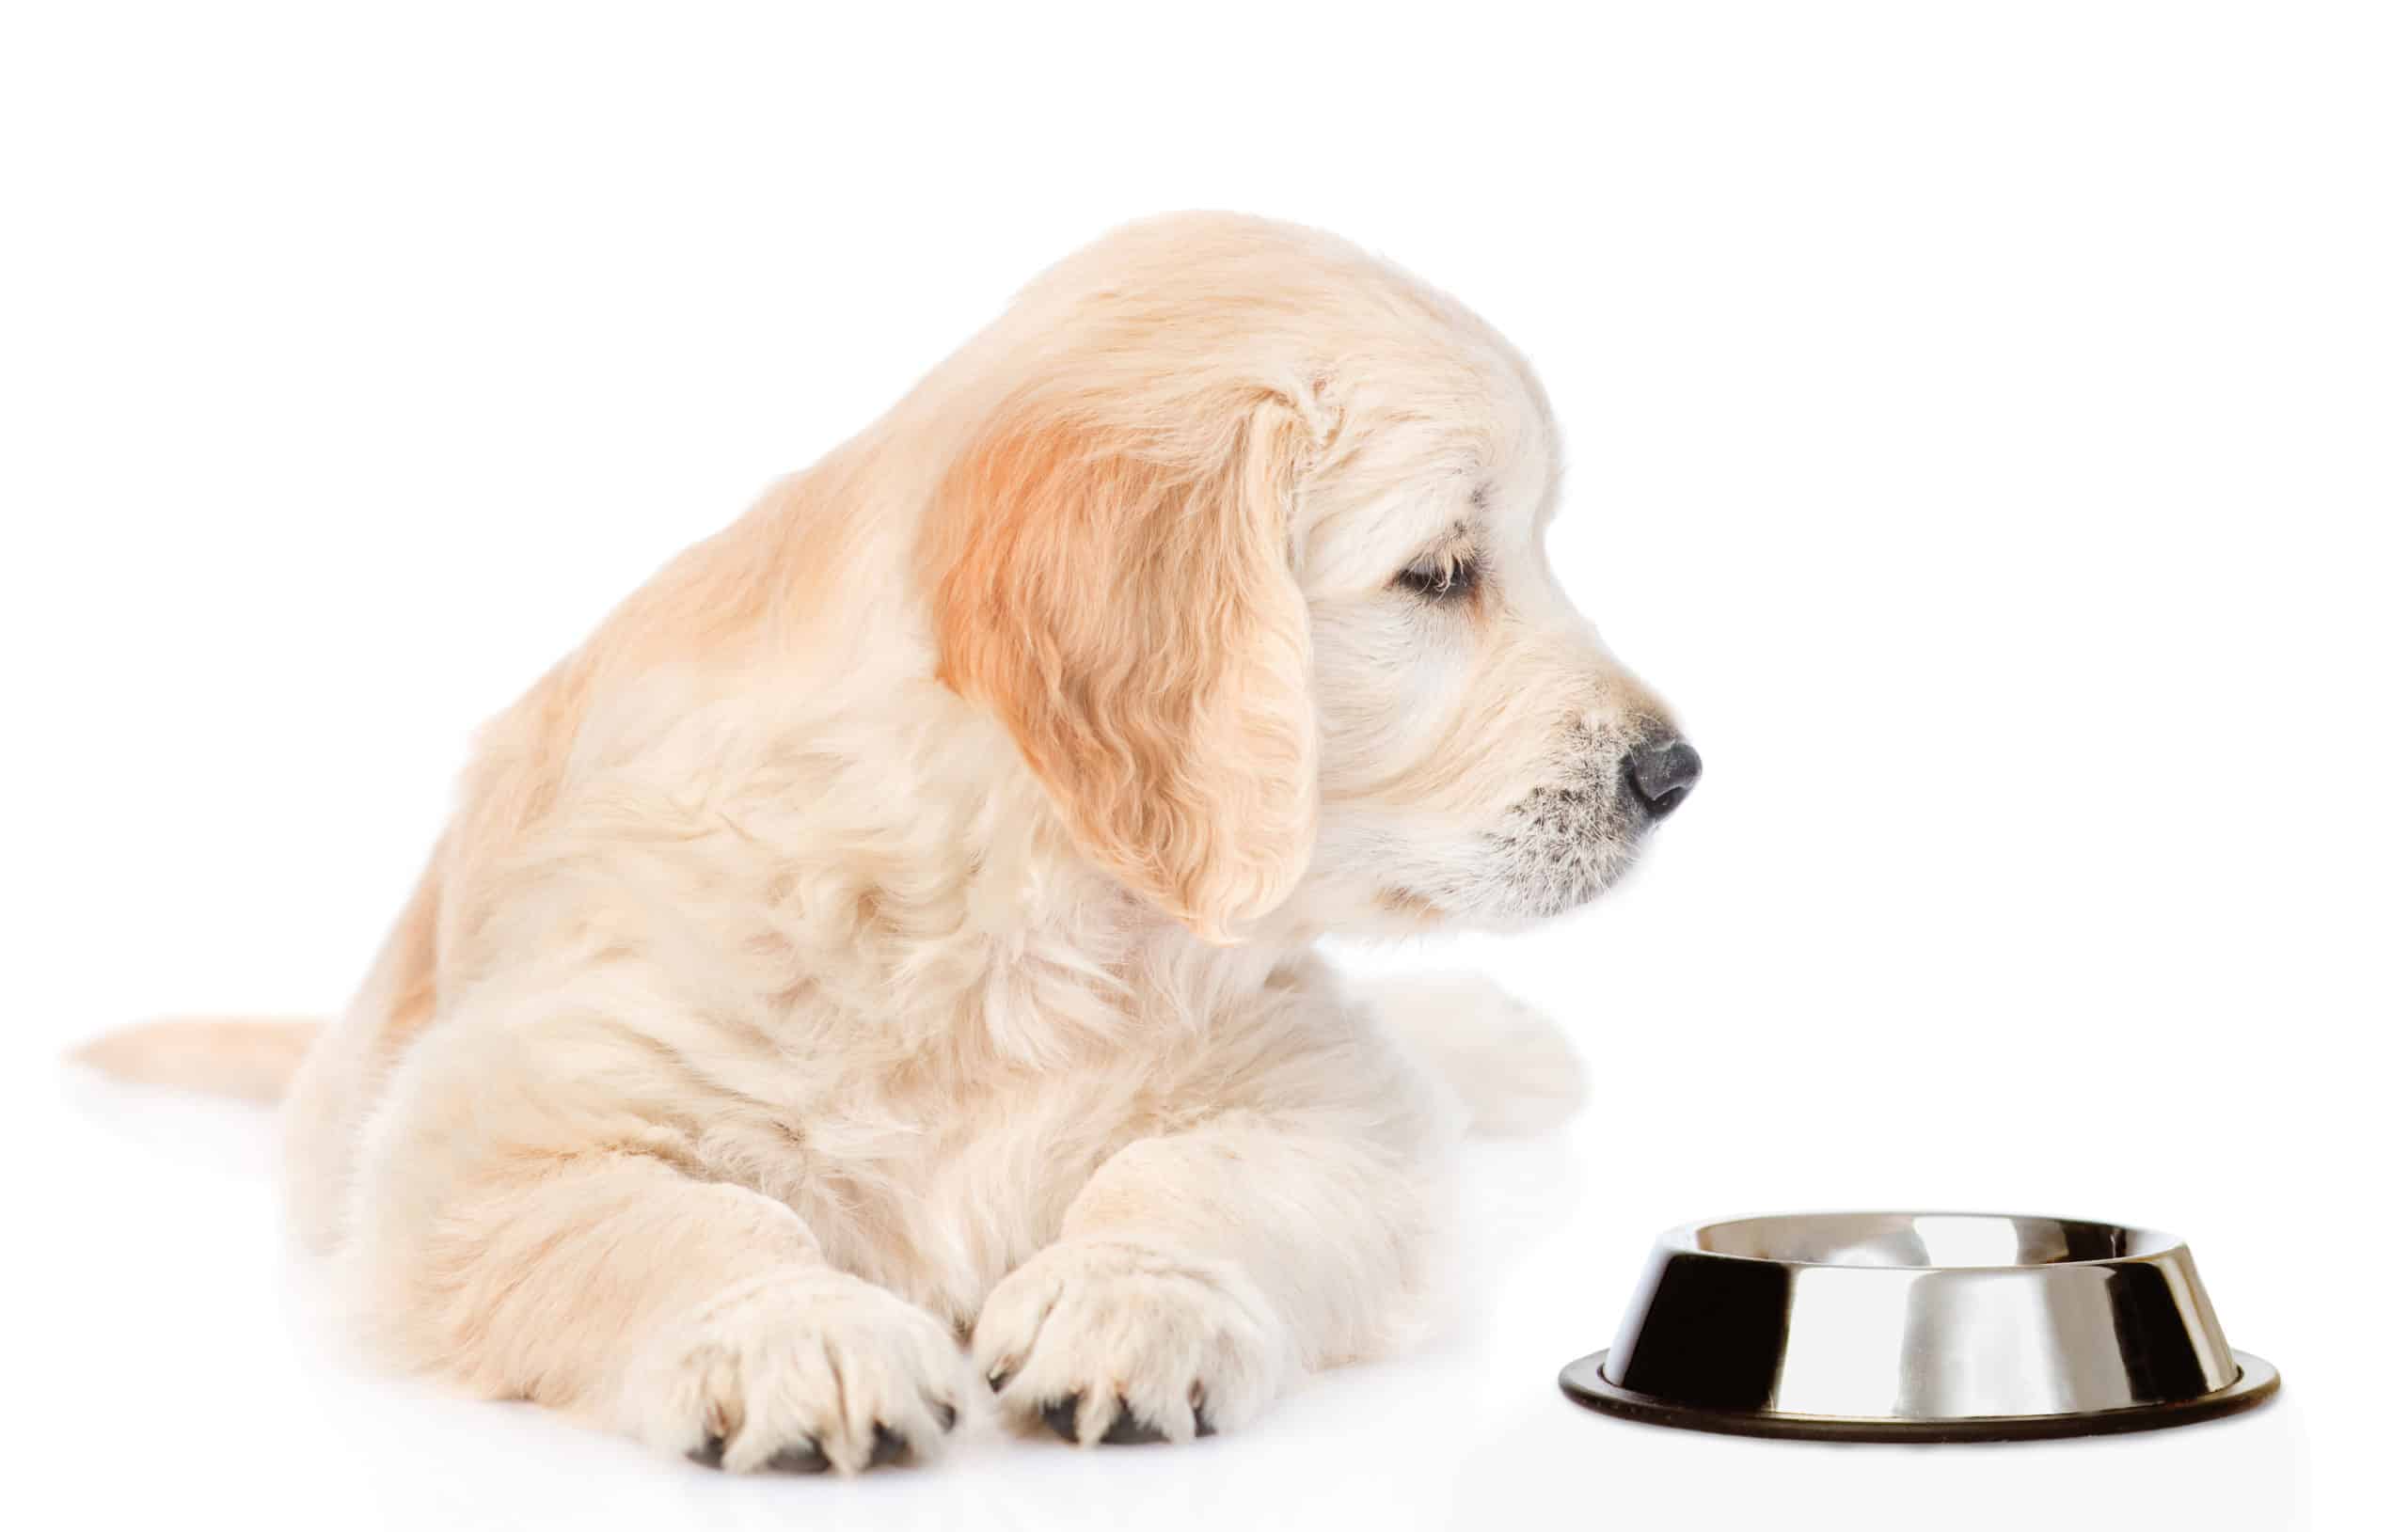 Is it ok to only feed a dog once a day?